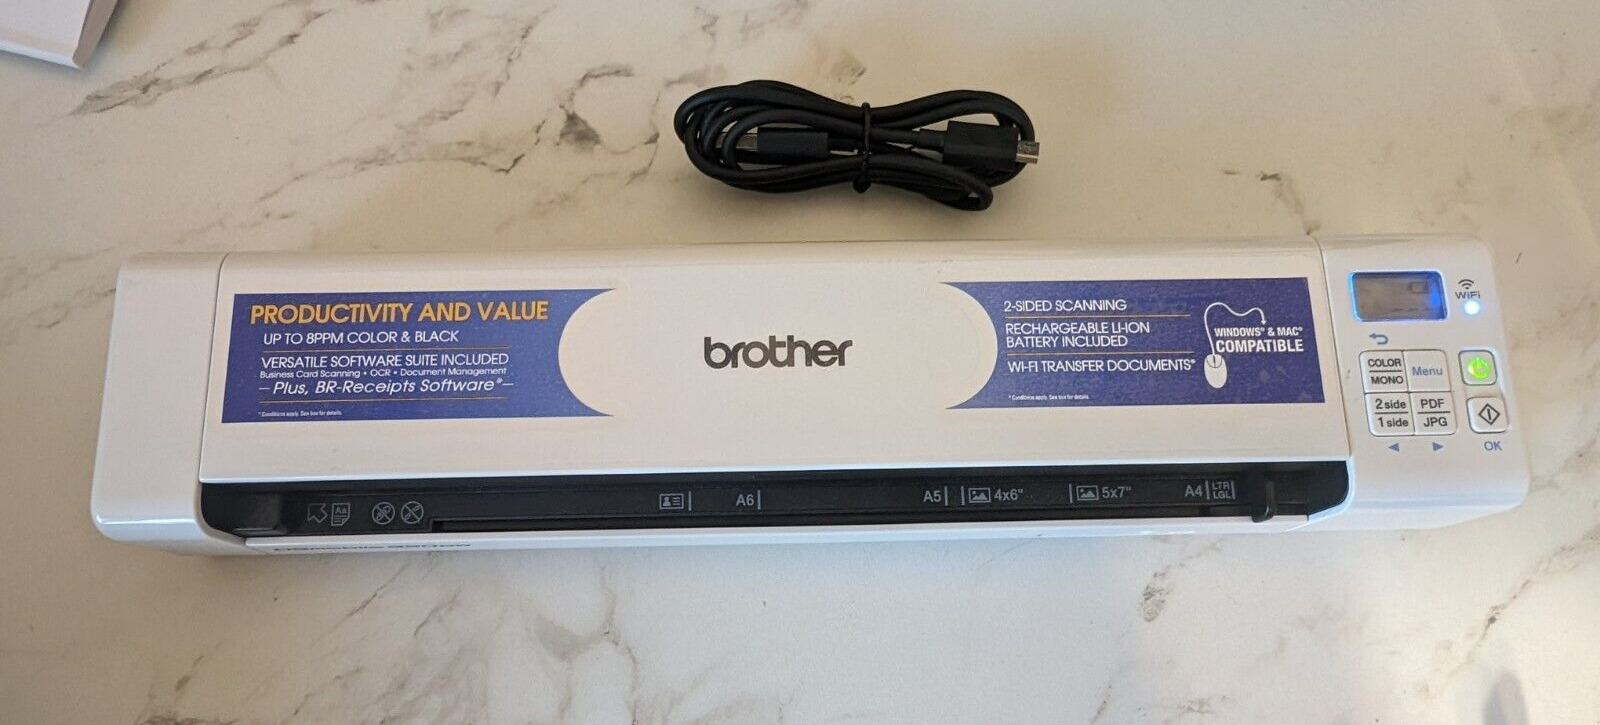 Brother DS-920DW Wireless Duplex Mobile Color Page Scanner w/ USB Charger WORKS